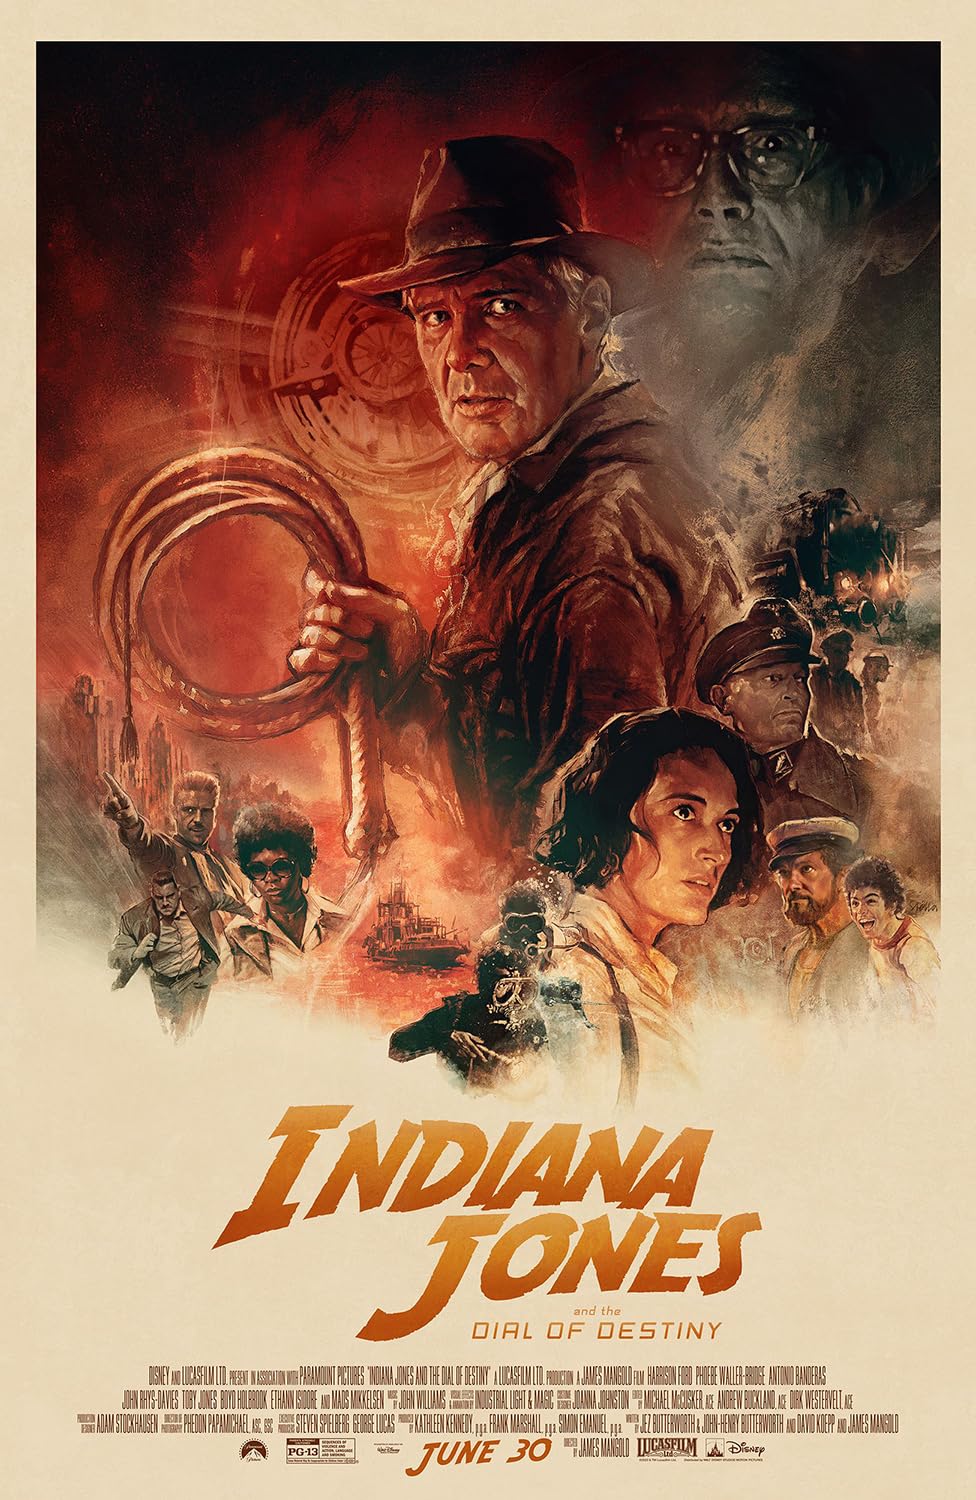 Indiana Jones: An Iconic Franchise that Continues to Inspire